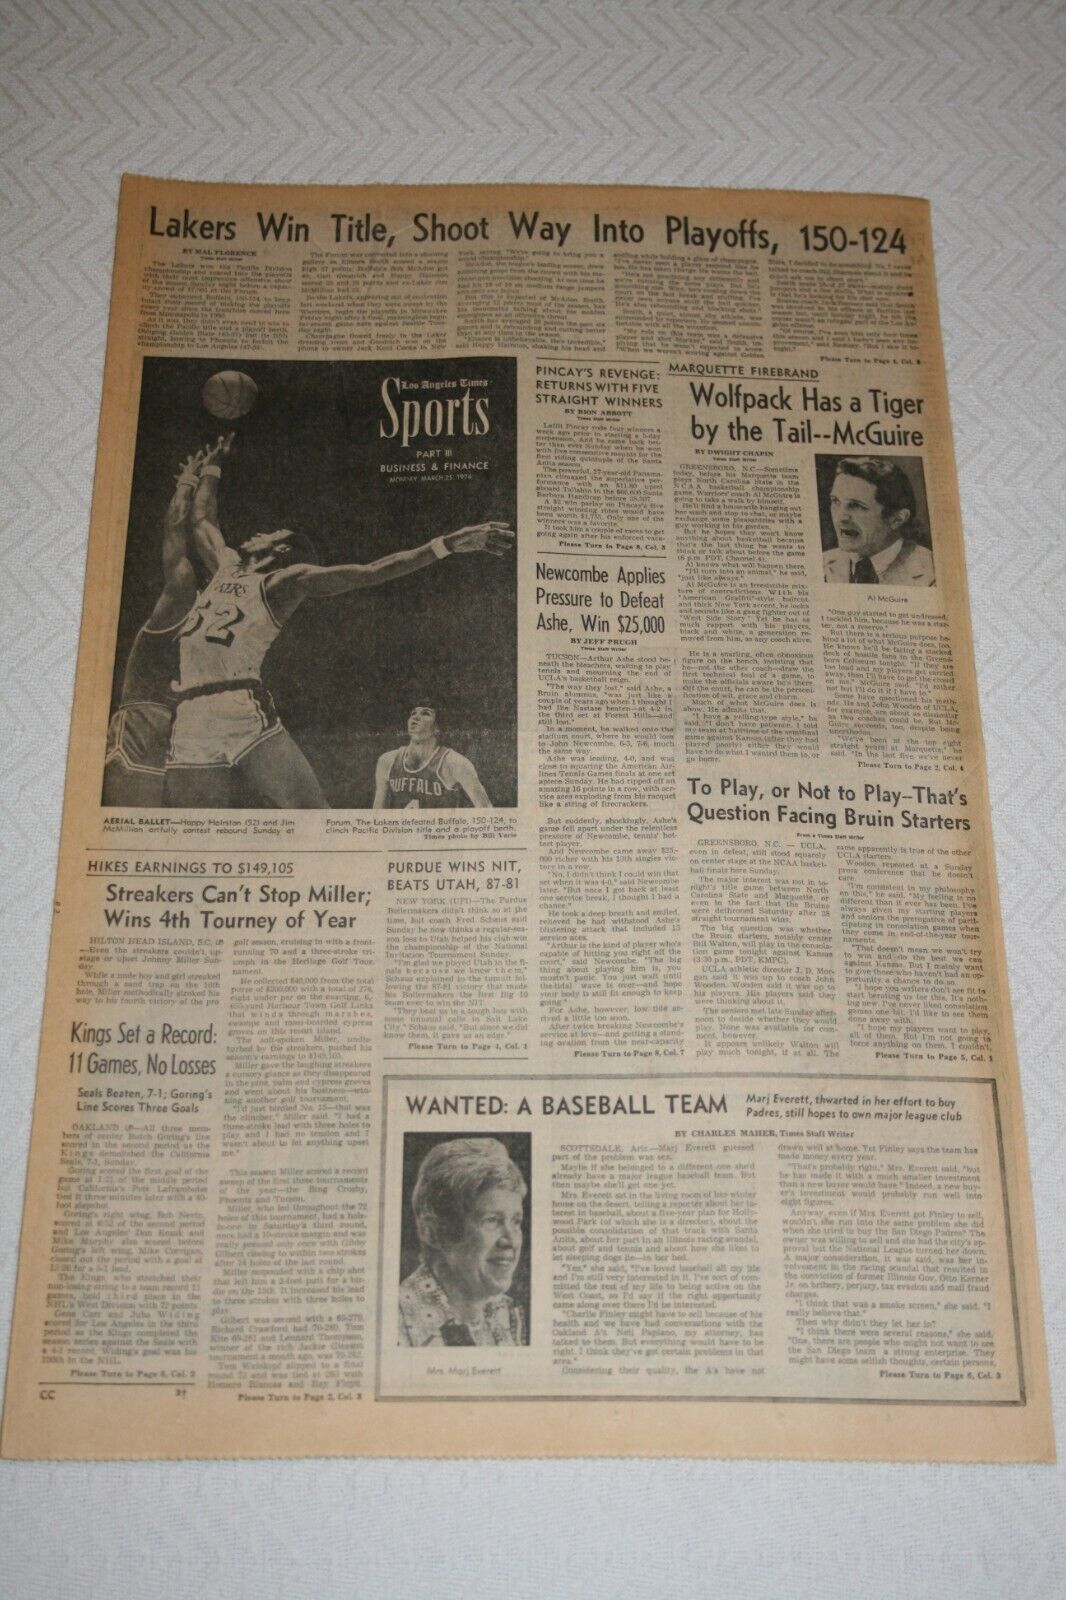 1974 Los Angeles Times * Lakers Win West Title Kings Set Record Purdue Wins NIT